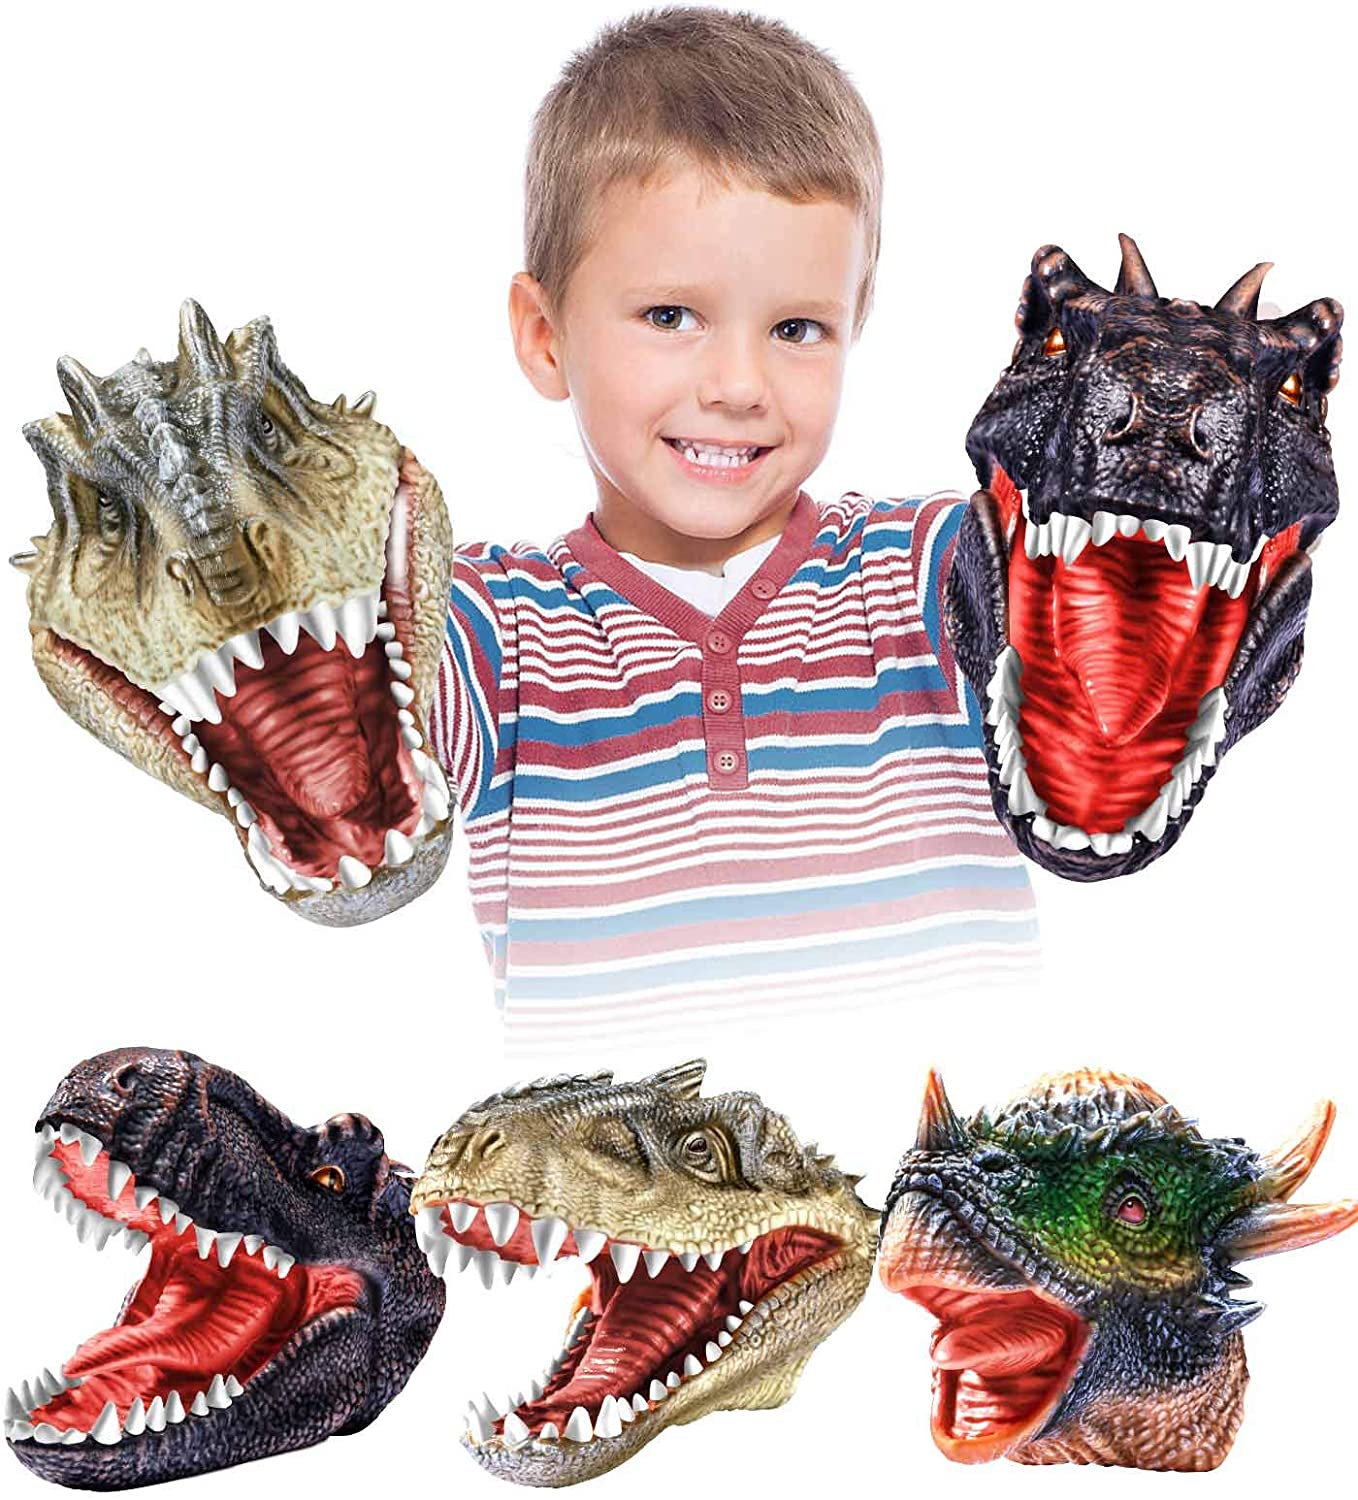 Dinosaur Hand Puppet Realistic Dinosaur Head Hand Puppet Toys for Adults & Kids 